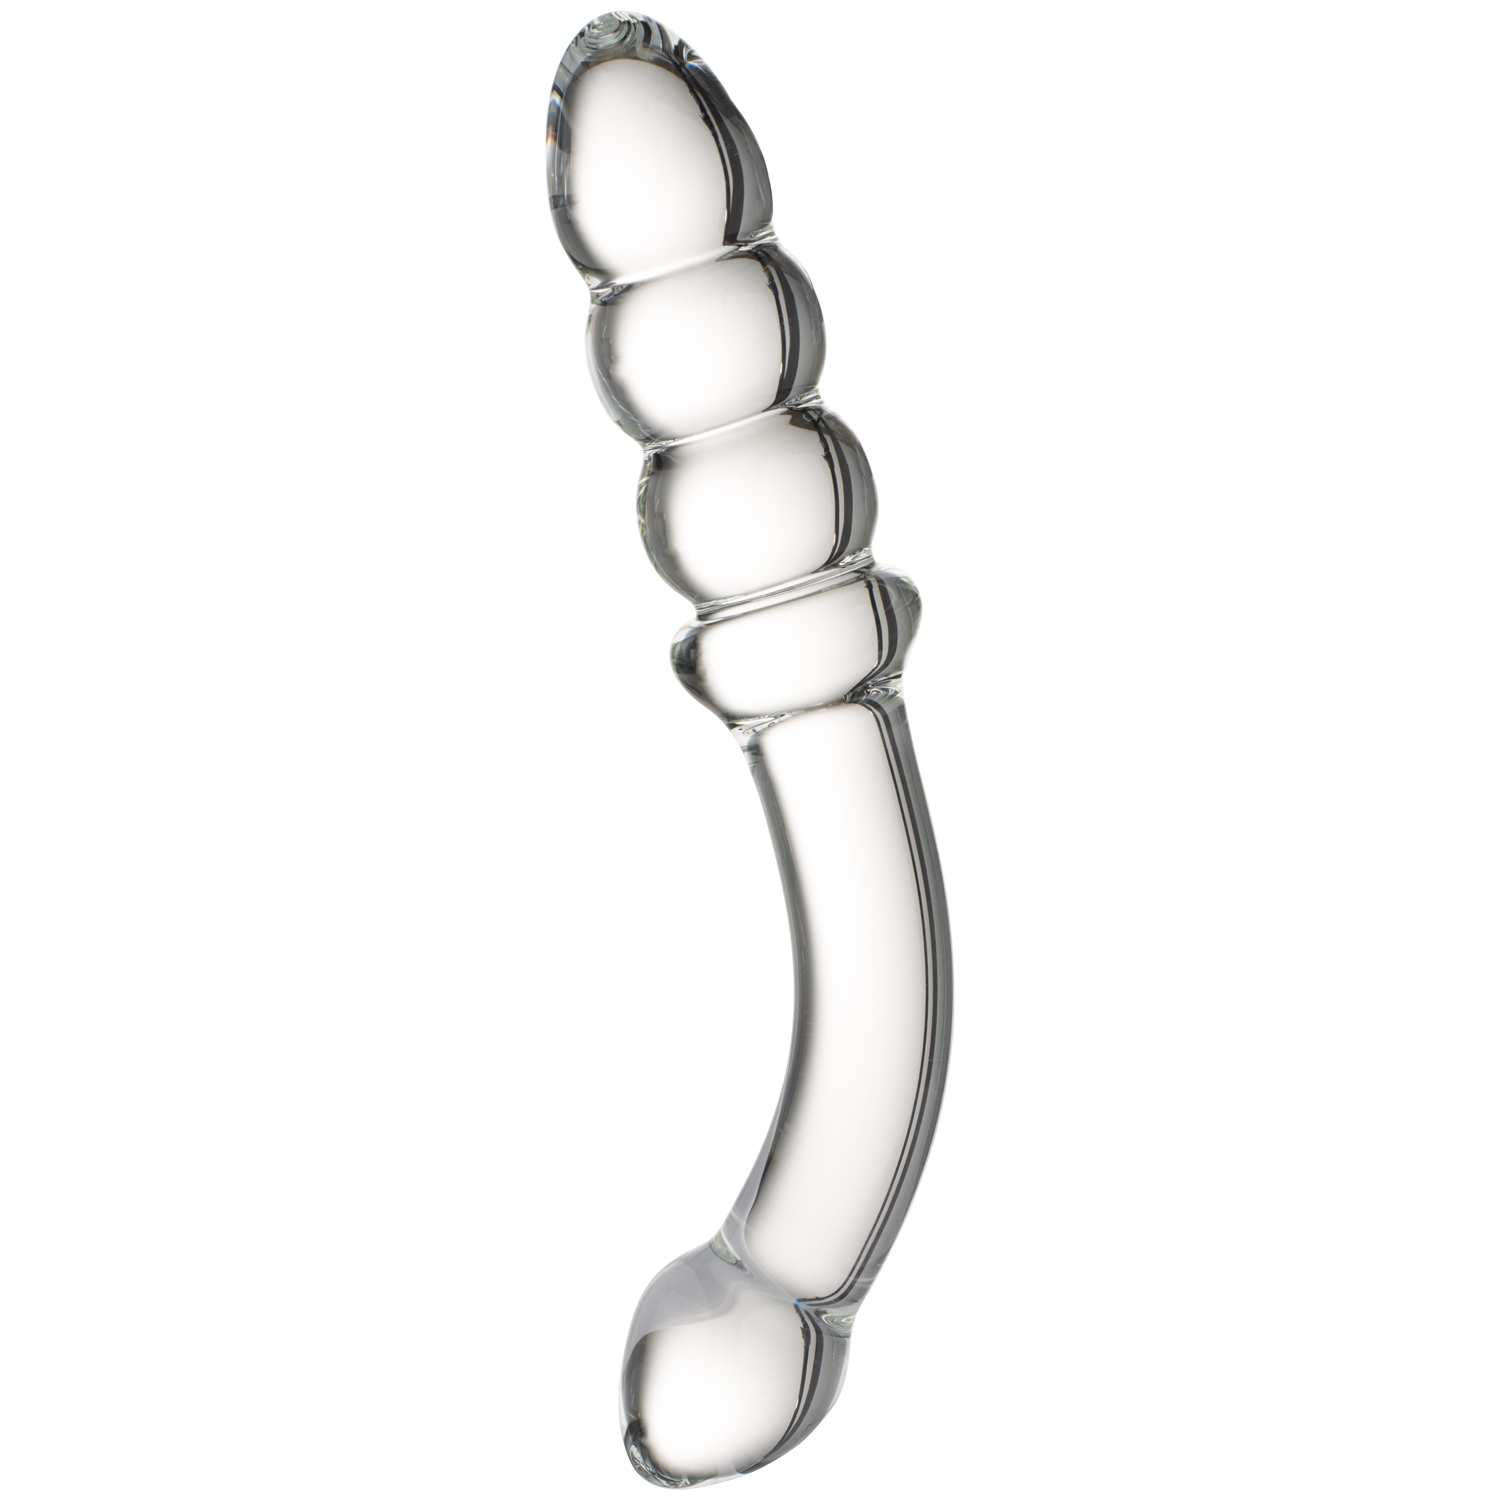 Sinful Ribbed Glas Dildo - Clear